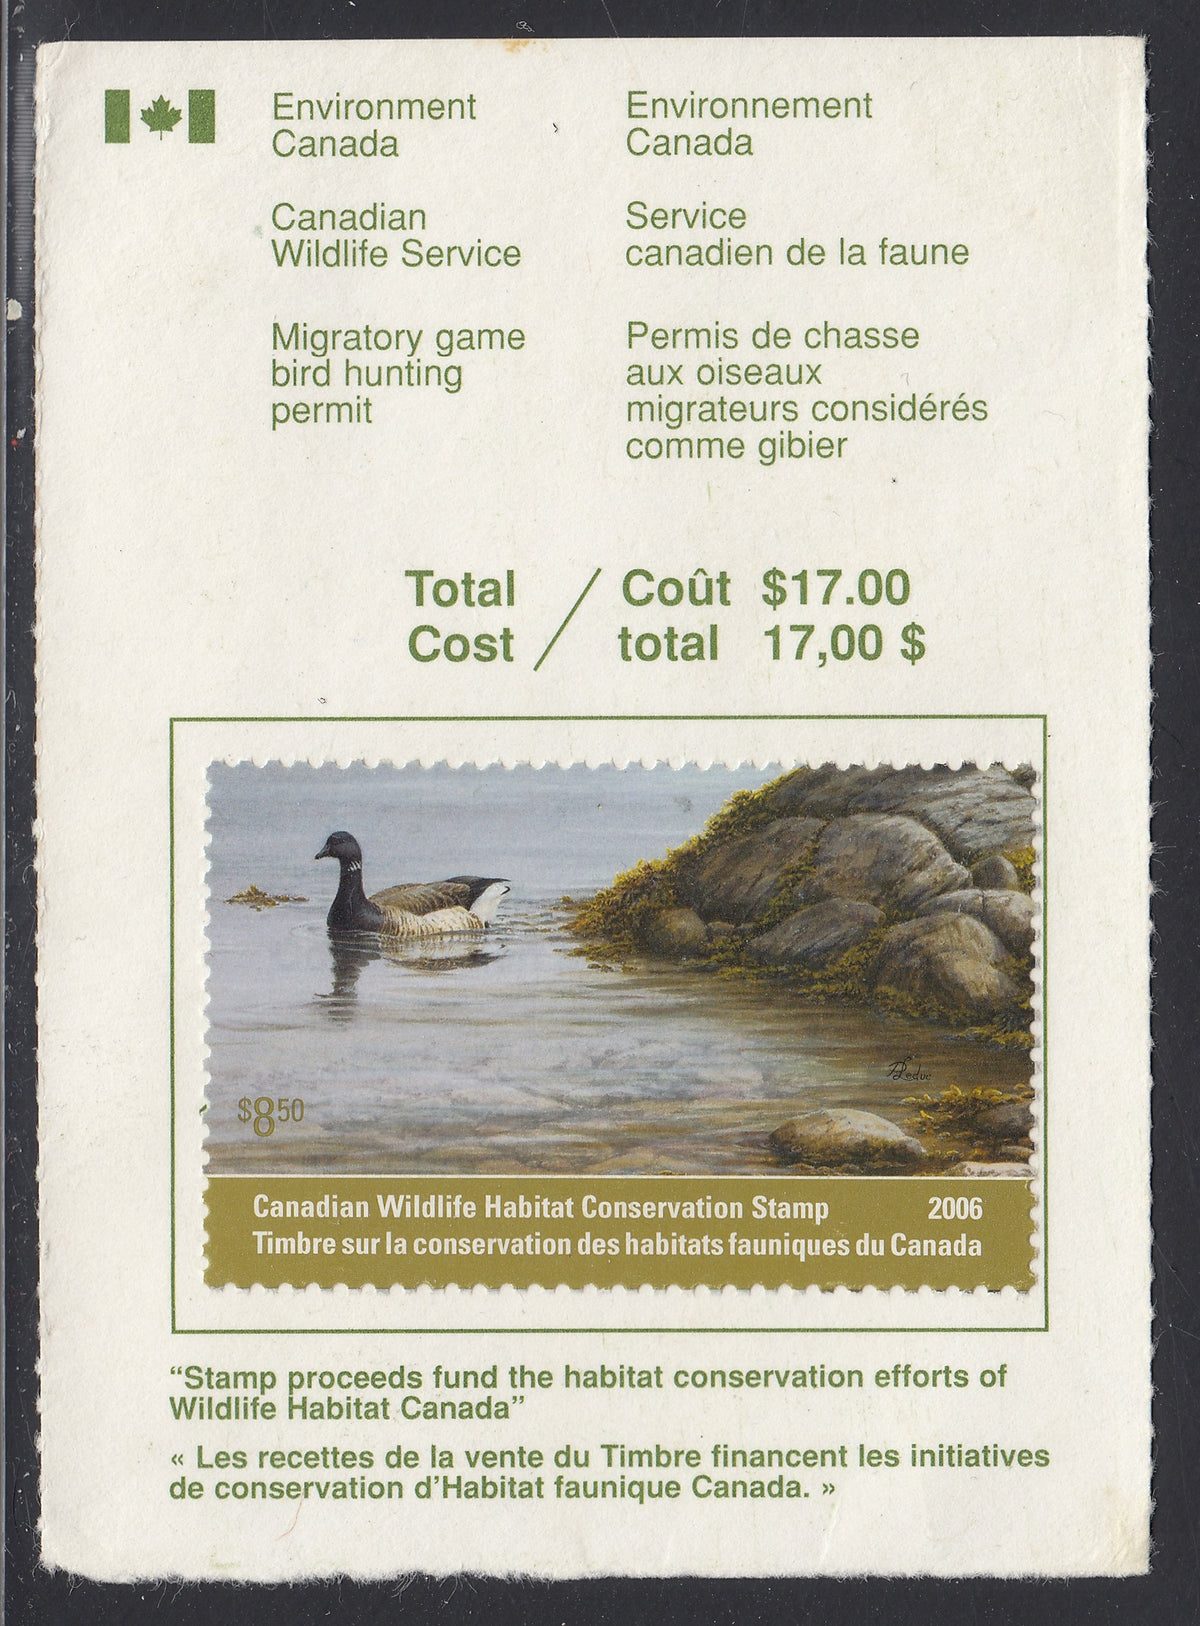 0022FW2105 - FWH22a - Used on License